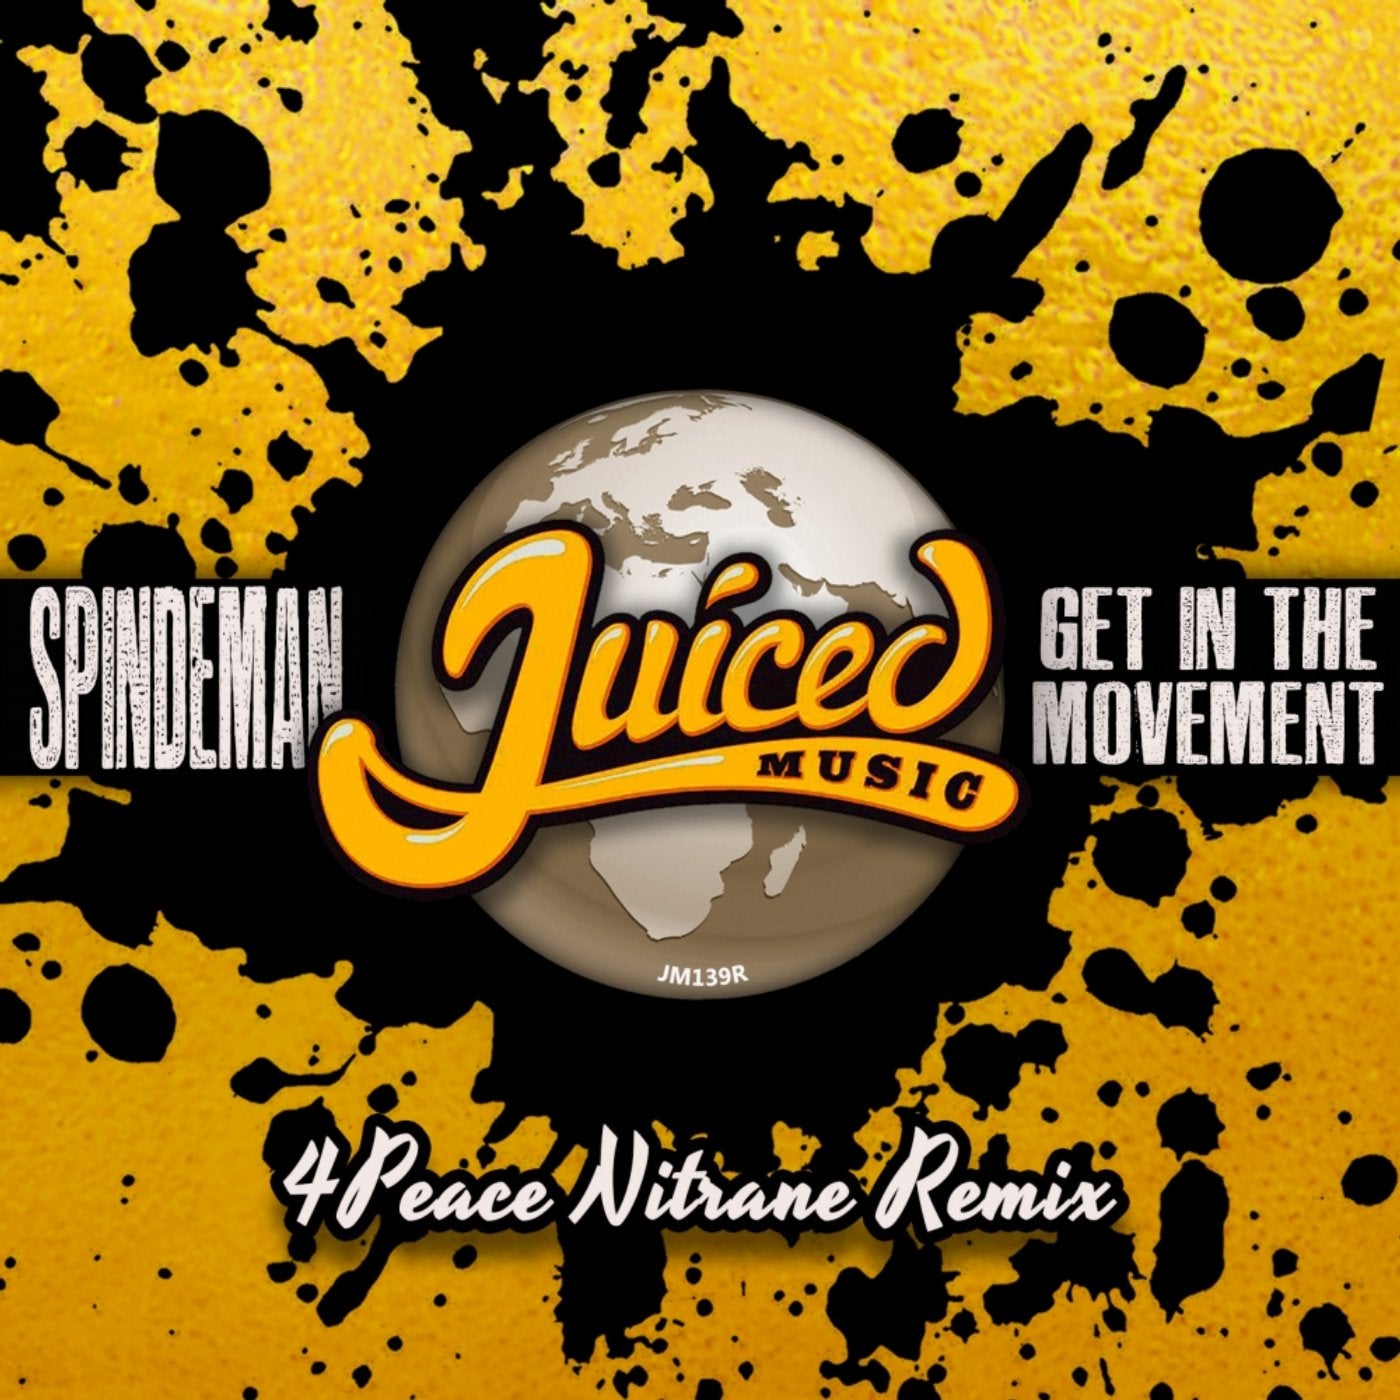 Get In The Movement (4Peace Nitrane Remix)